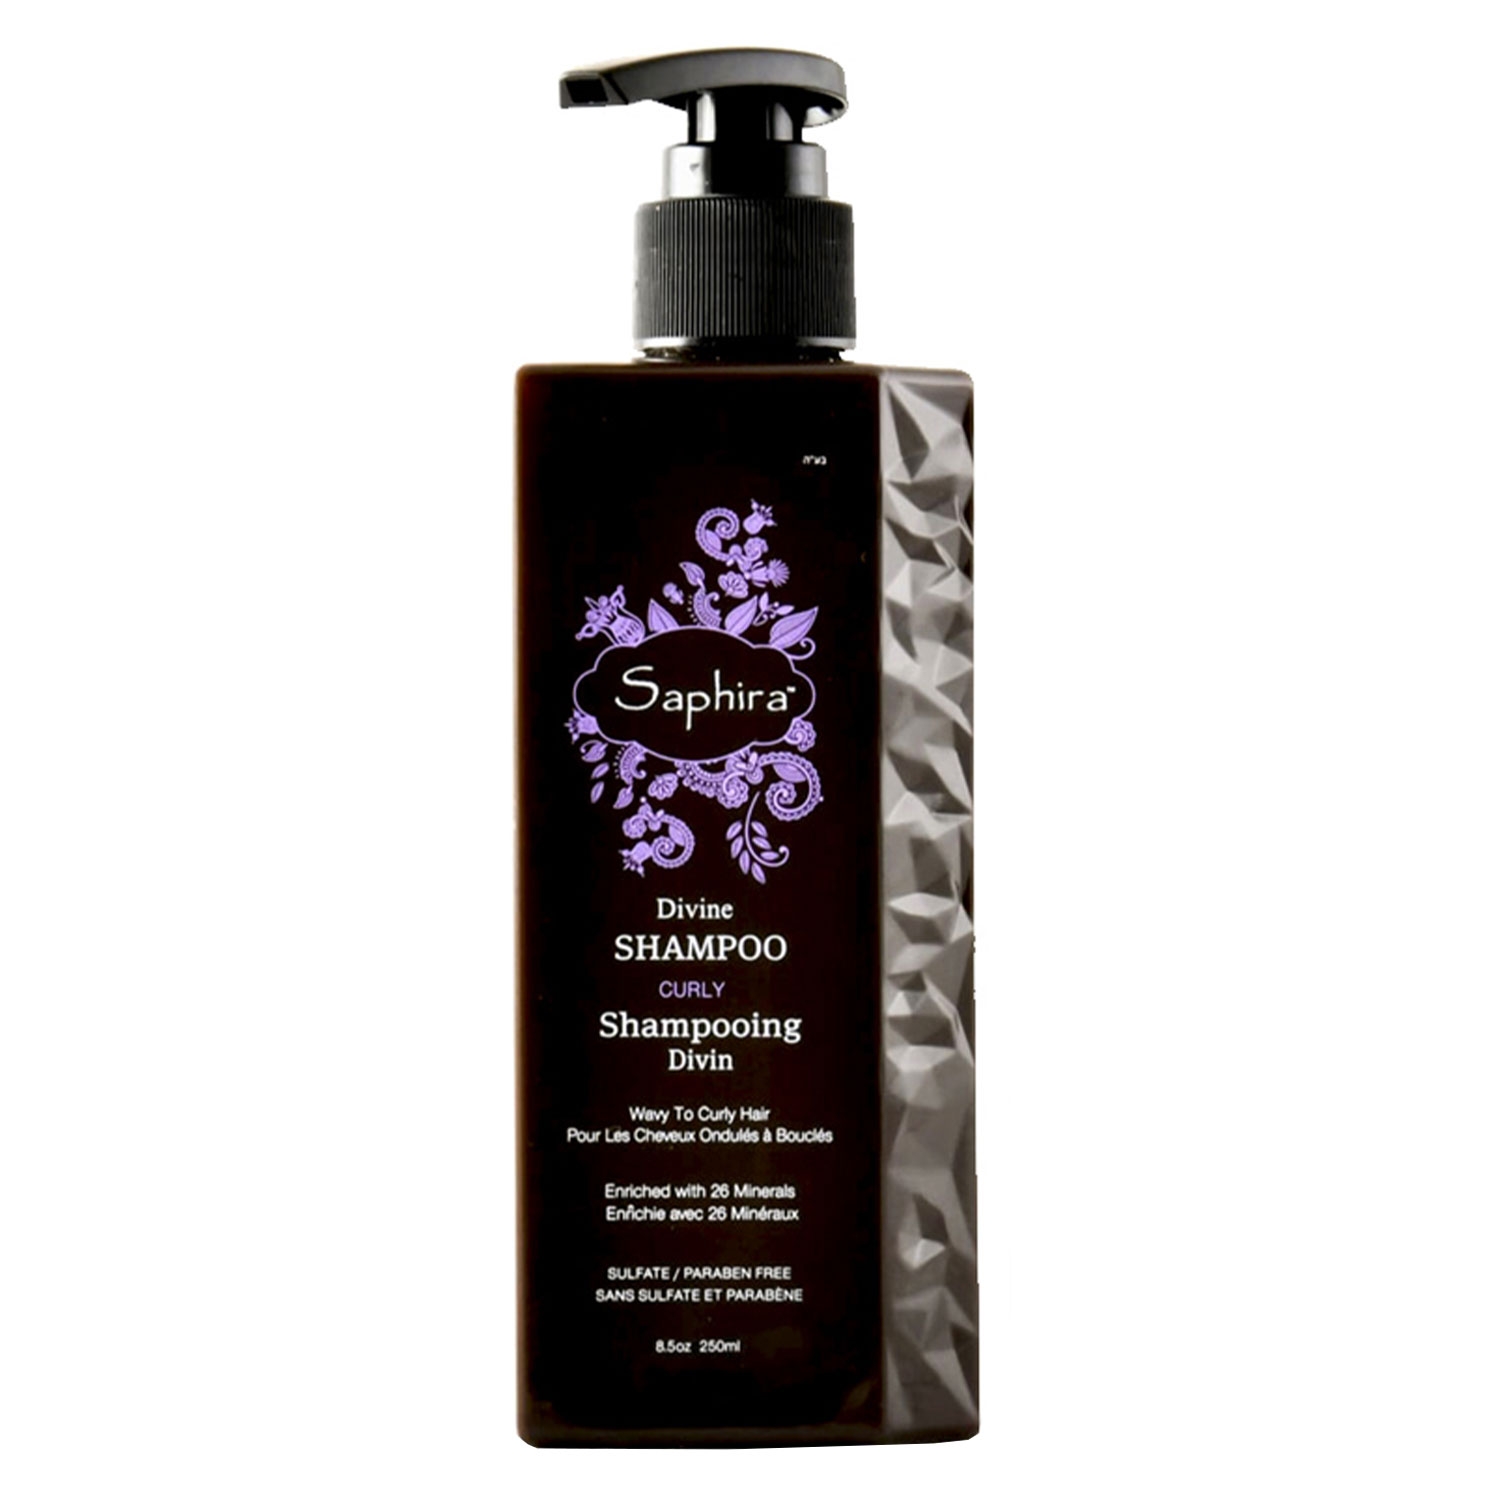 Product image from Saphira - Divine Shampoo Curly